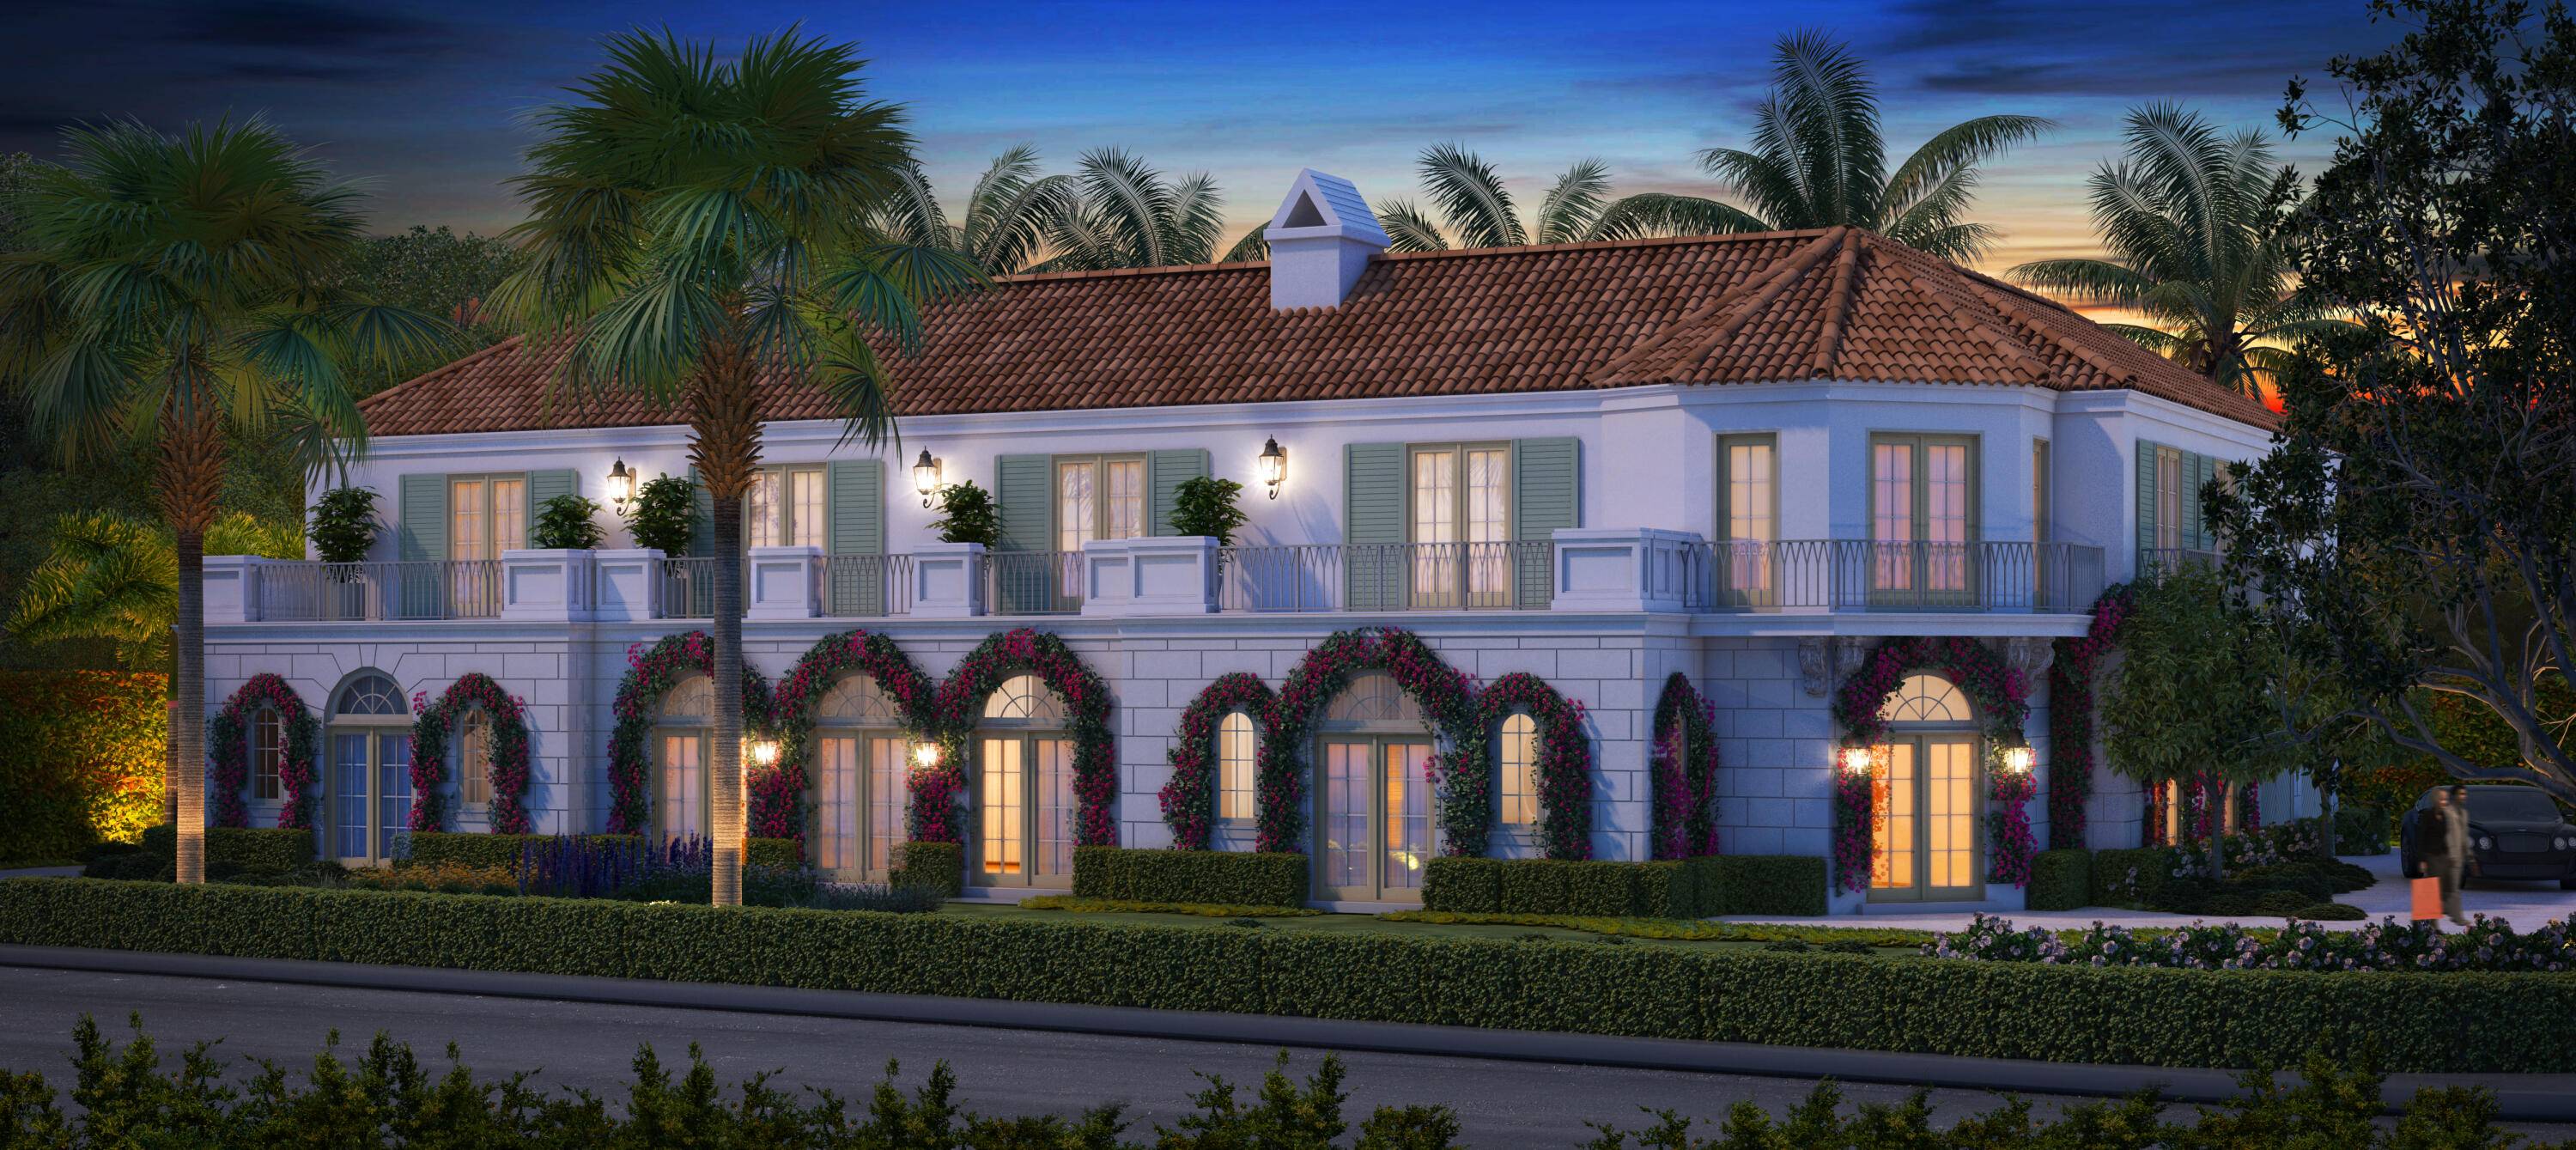 Currently under construction and developed by Todd Michael Glaser, this 5 bedroom 6.